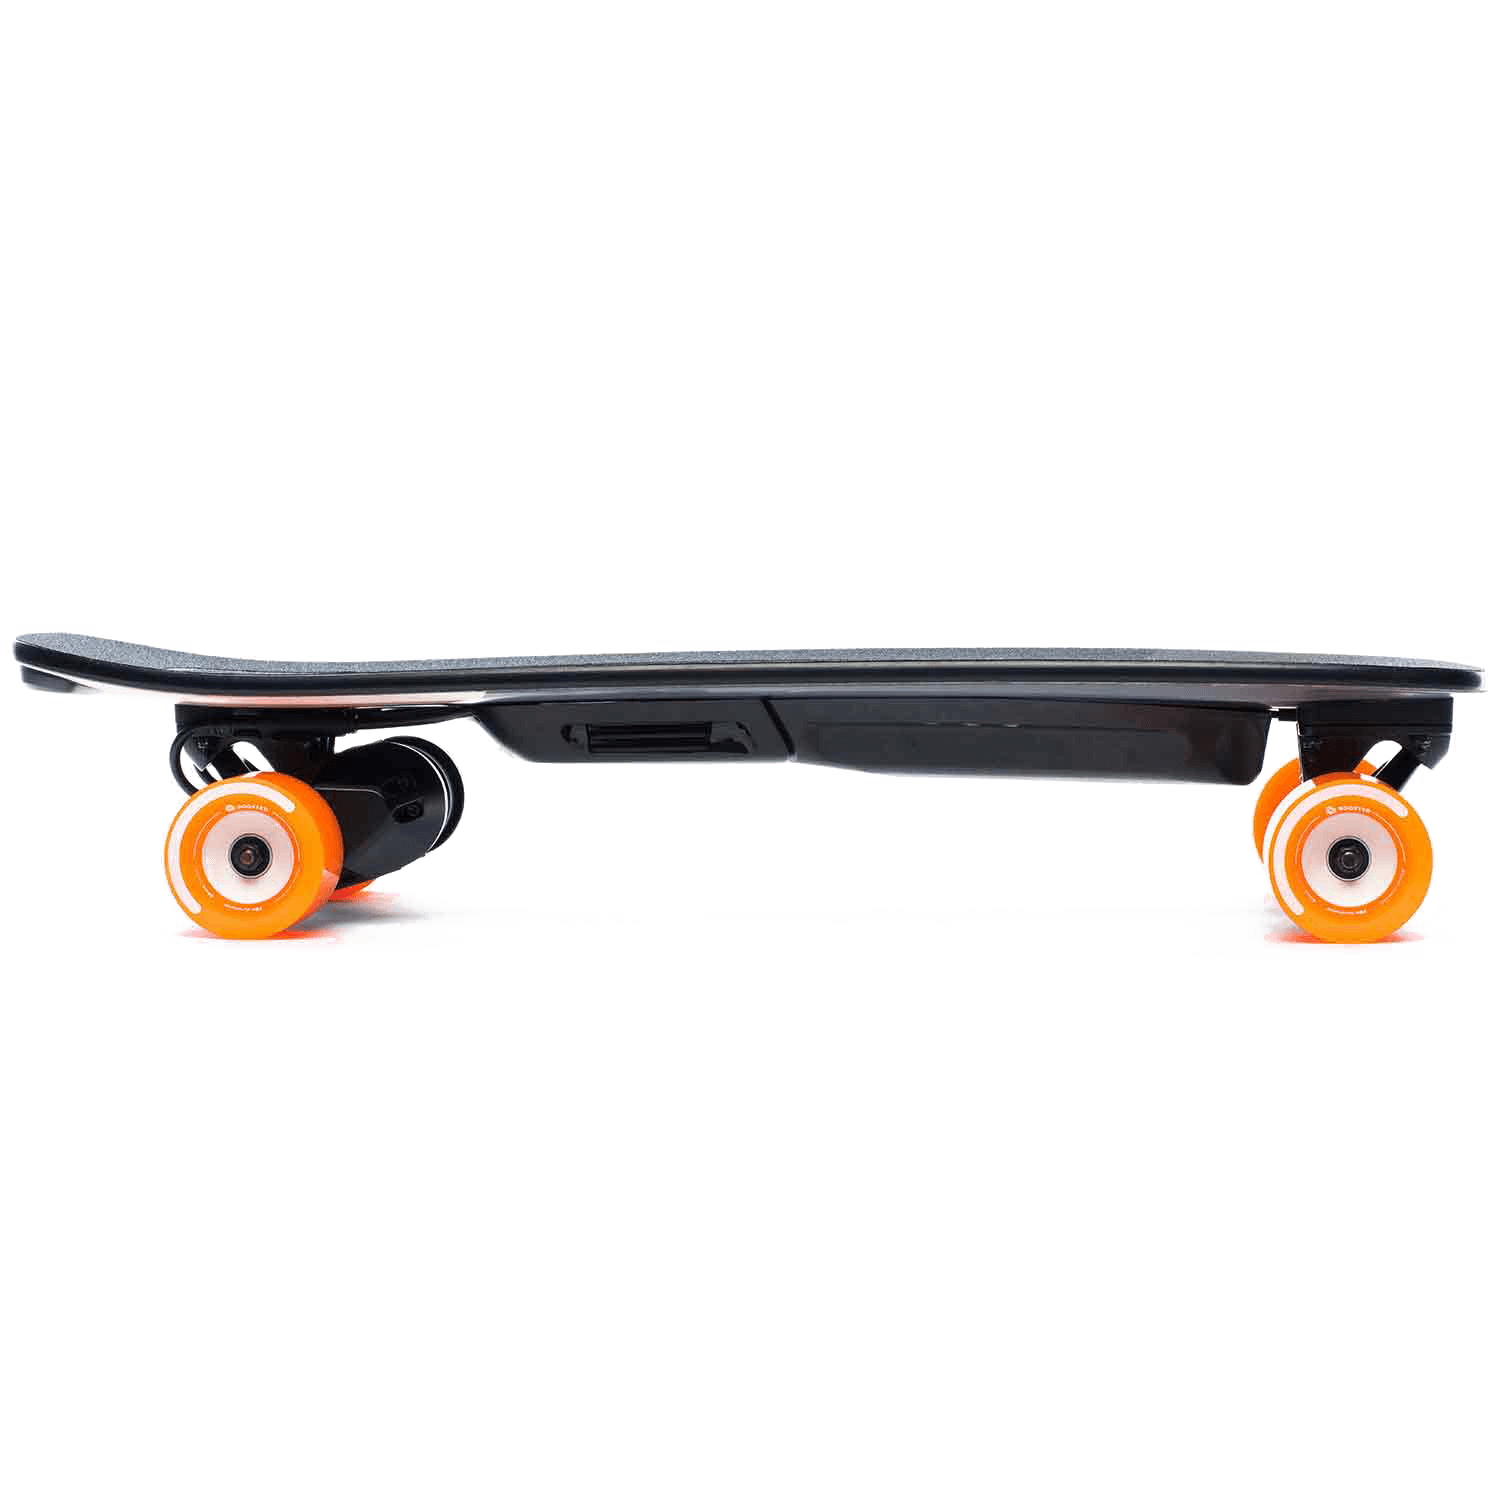 Boosted Mini S - Boosted USA